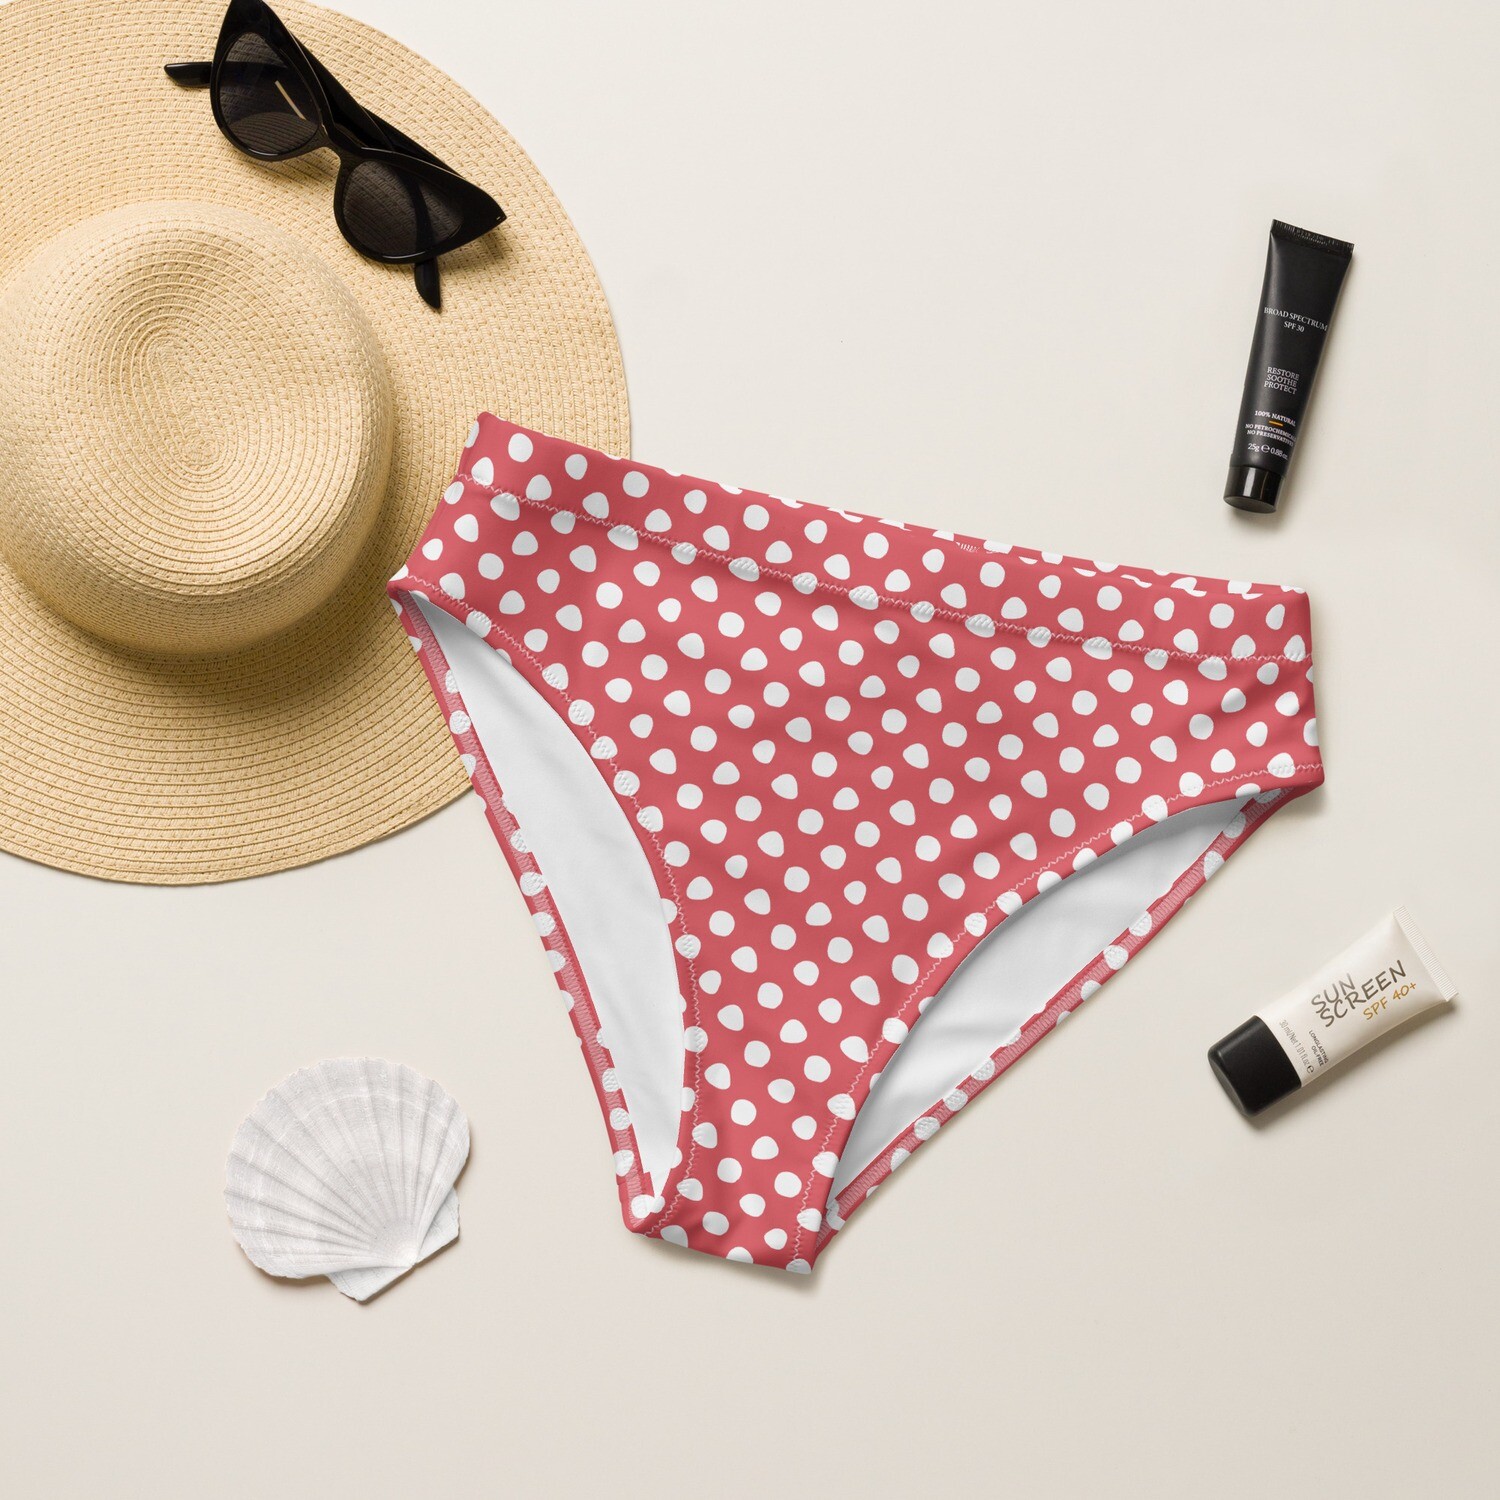 Retro red recycled high-waisted bikini bottom with polka dots in sizes XS-3XL